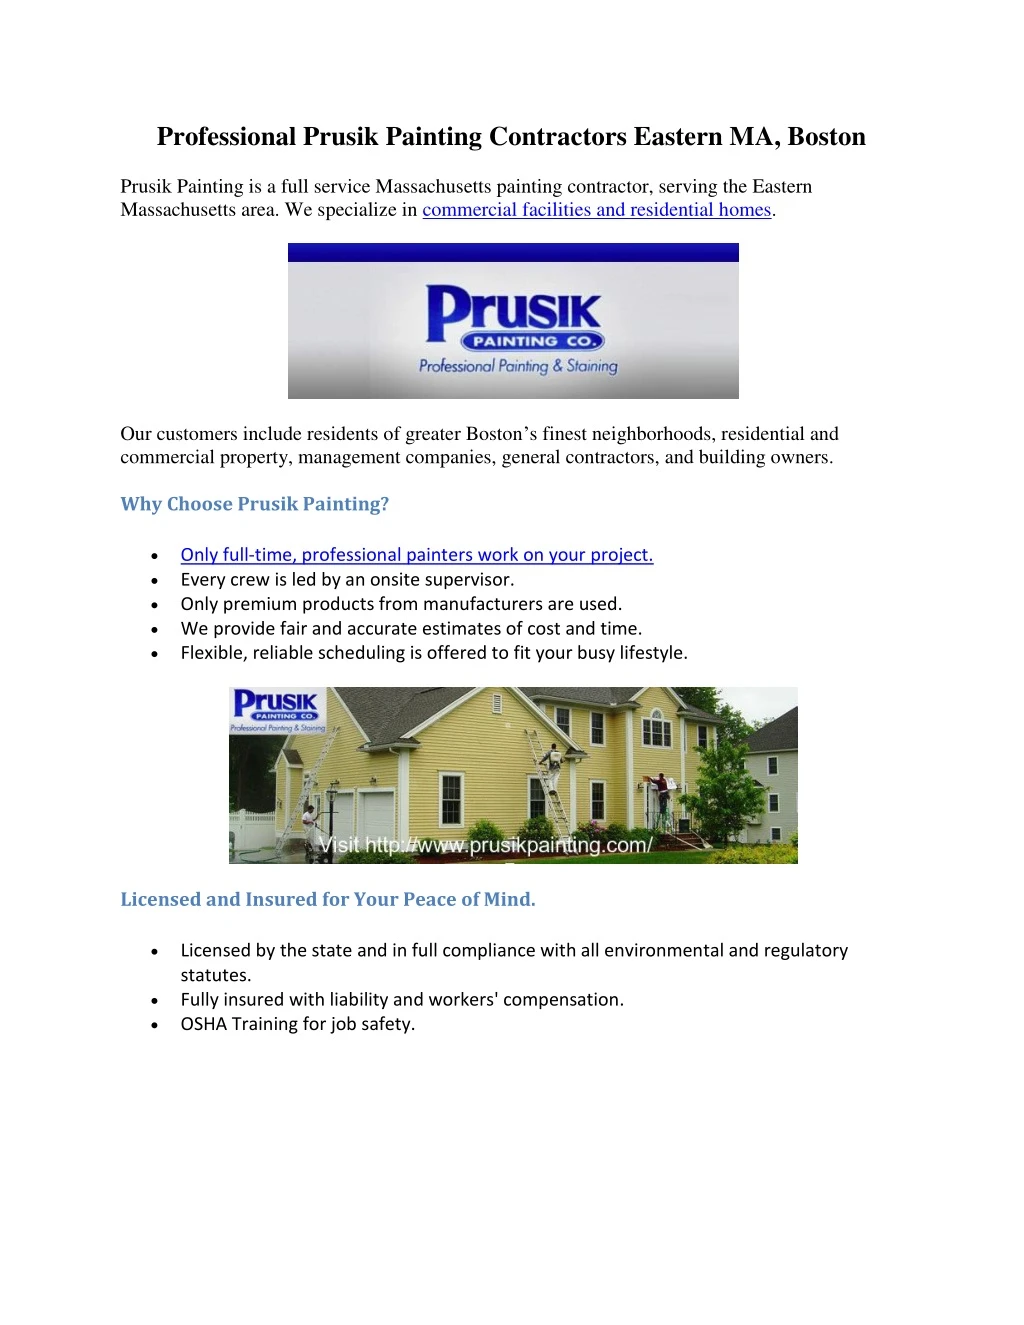 professional prusik painting contractors eastern